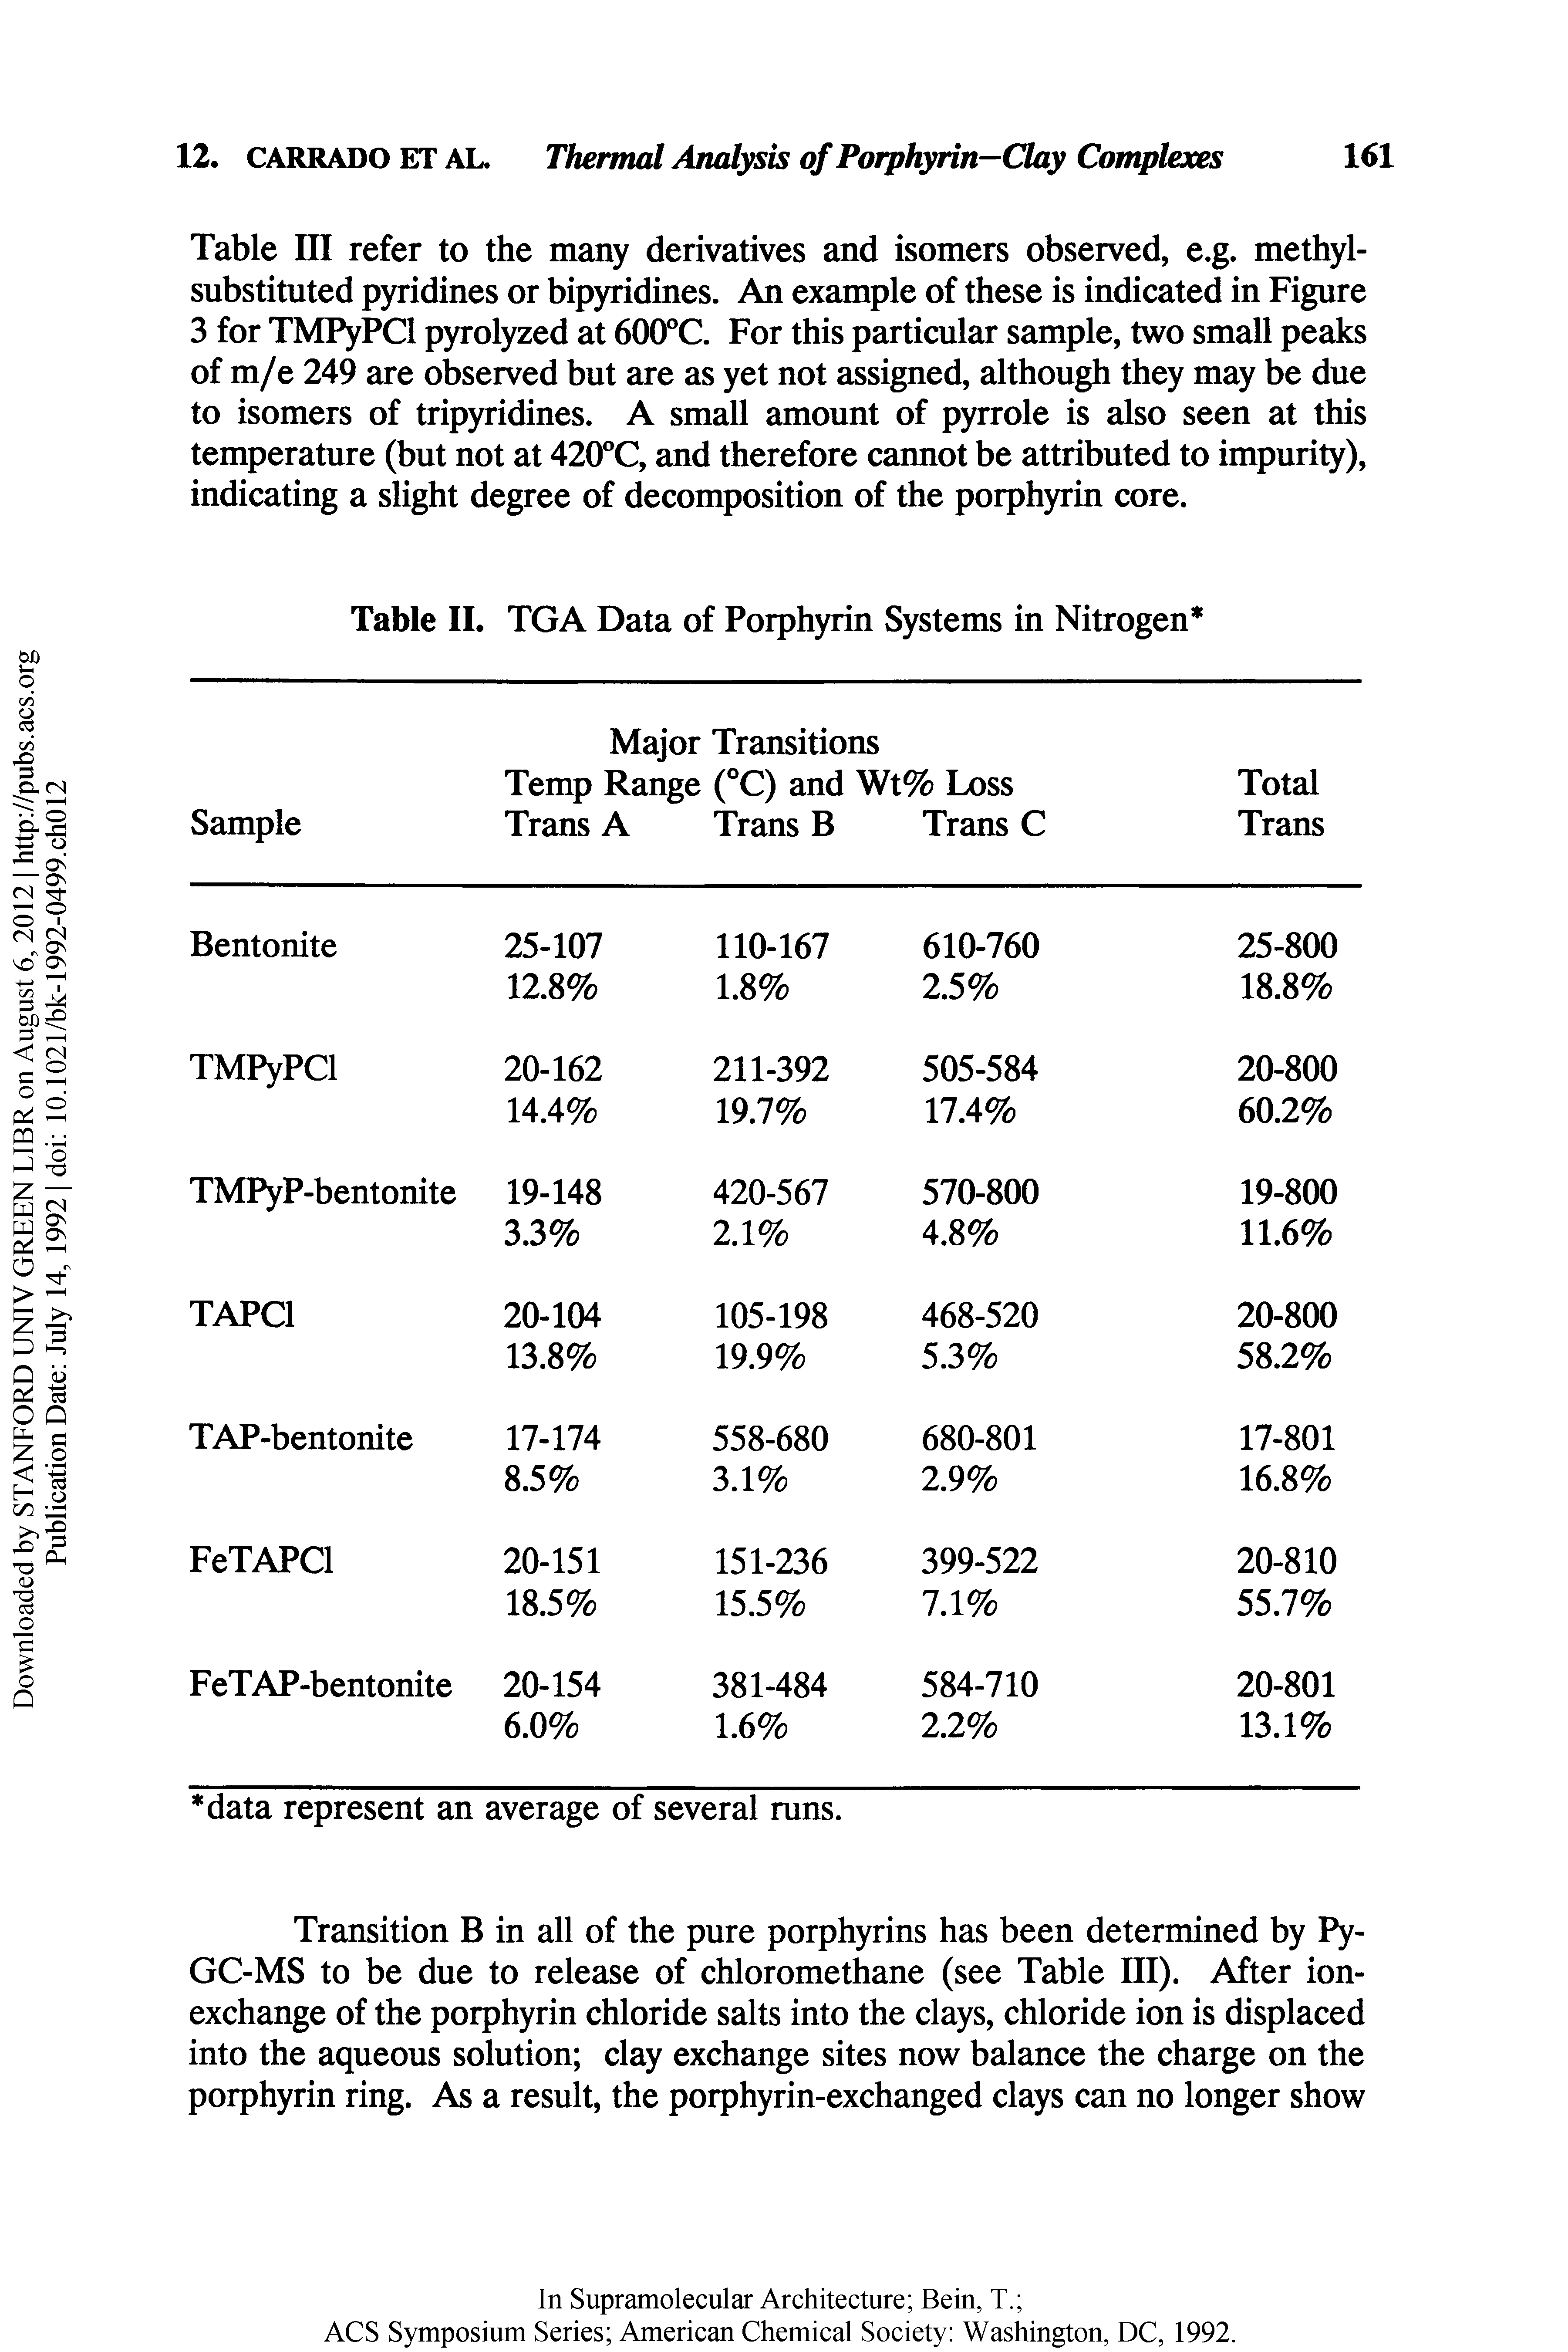 Table III refer to the many derivatives and isomers observed, e.g. methyl-substituted pyridines or bipyridines. An example of these is indicated in Figure 3 for TMPyPCl pyrolyzed at 600°C. For this particular sample, two small peaks of m/e 249 are observed but are as yet not assigned, although they may be due to isomers of tripyridines. A small amount of pyrrole is also seen at this temperature (but not at 420 C, and therefore cannot be attributed to impurity), indicating a slight degree of decomposition of the porphyrin core.